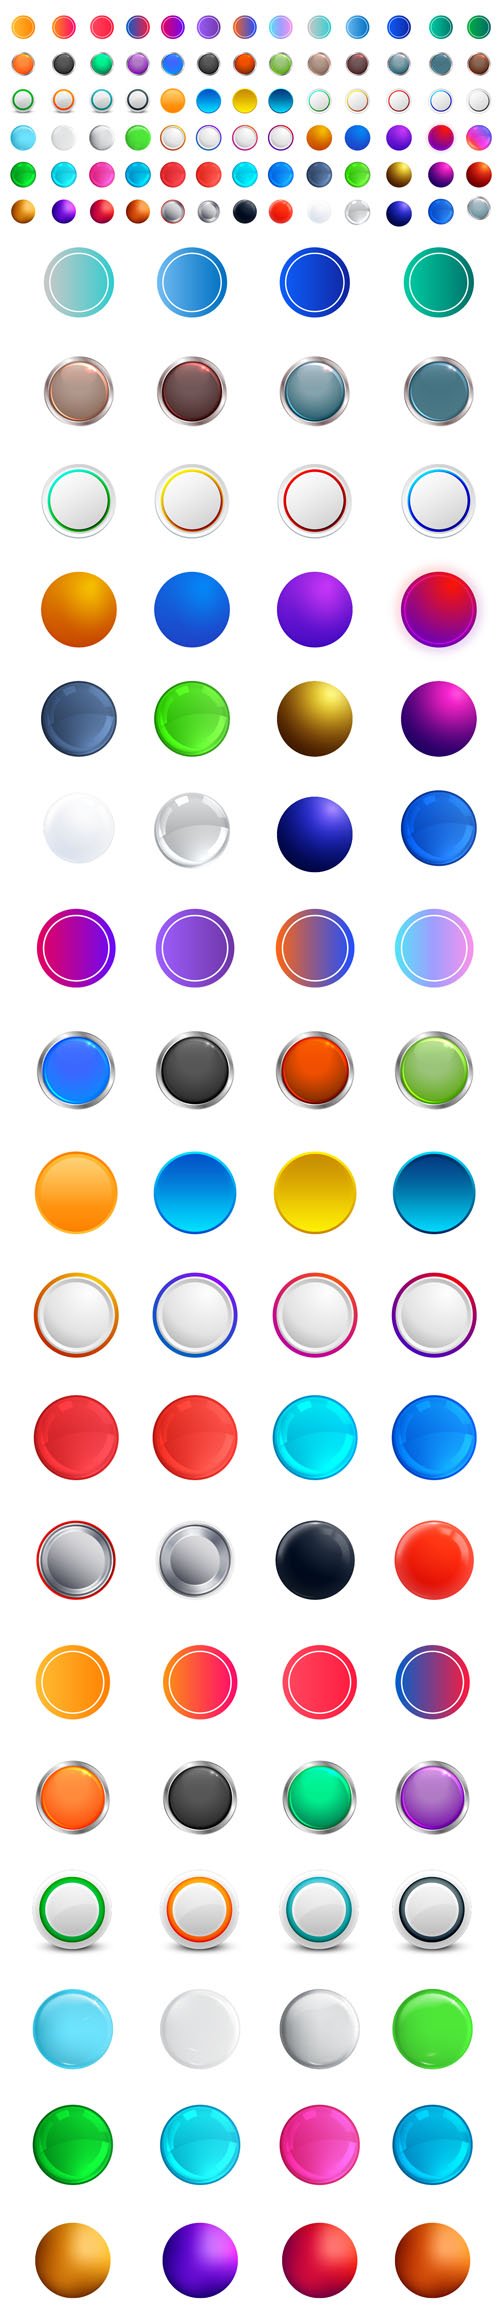 80+ Icons - Buttons Vector Templates